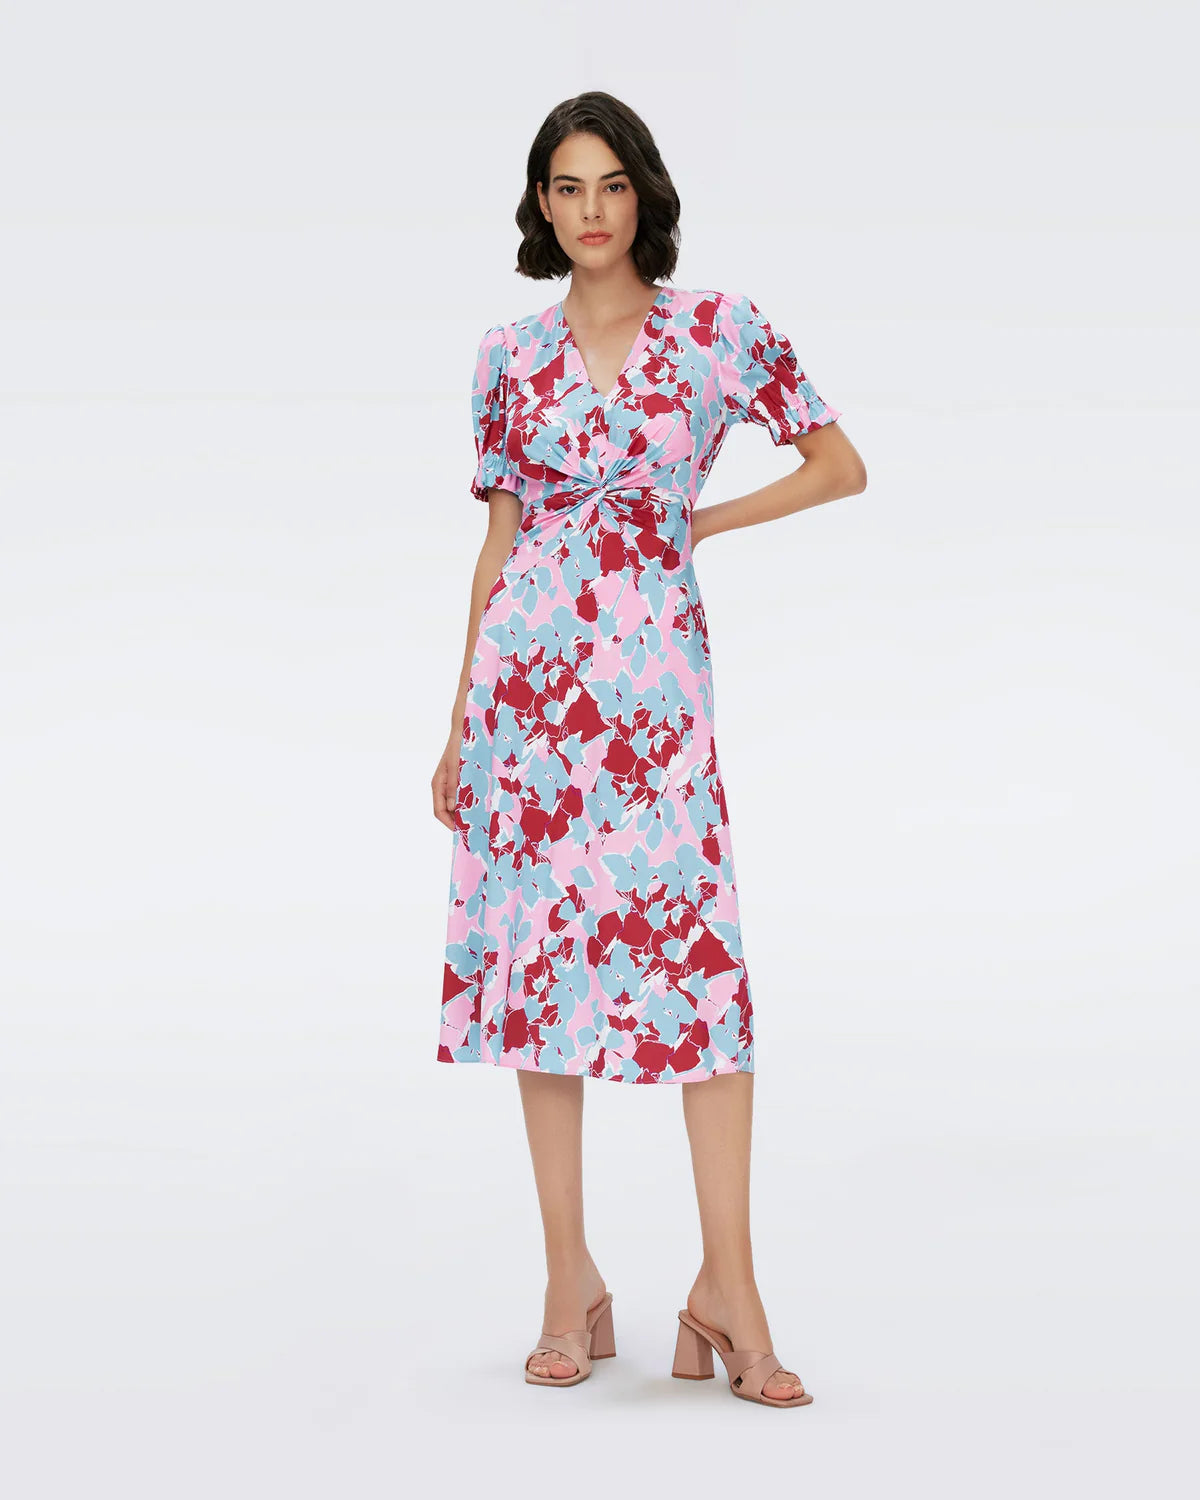 Anaba floral dress